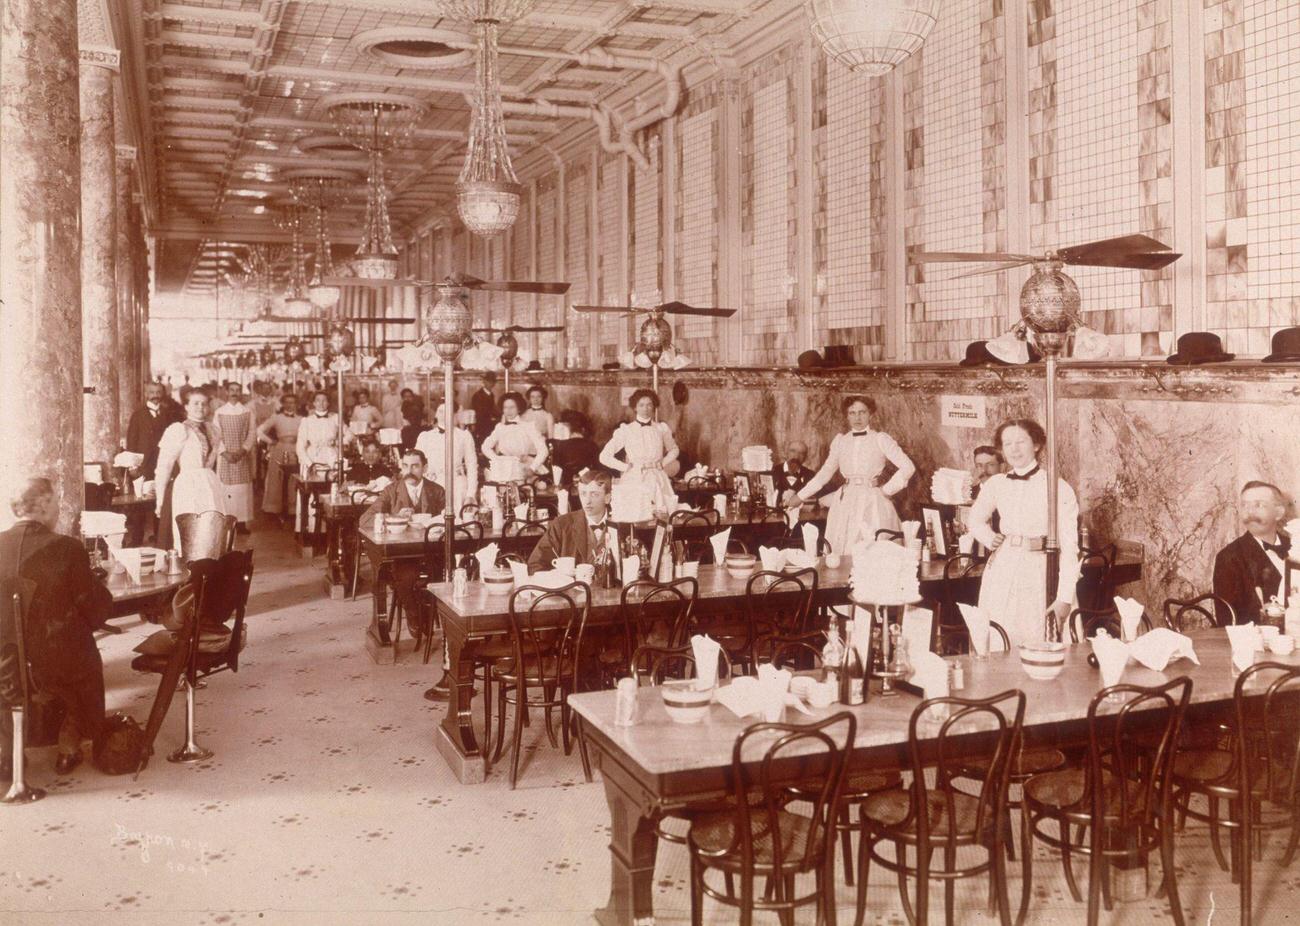 Waitresses Standing Near Tables Where Male Patrons Eat At A Childs Unique Diary Lunch Room, Possibly The Location At 47 East 42Nd Street, New York City.